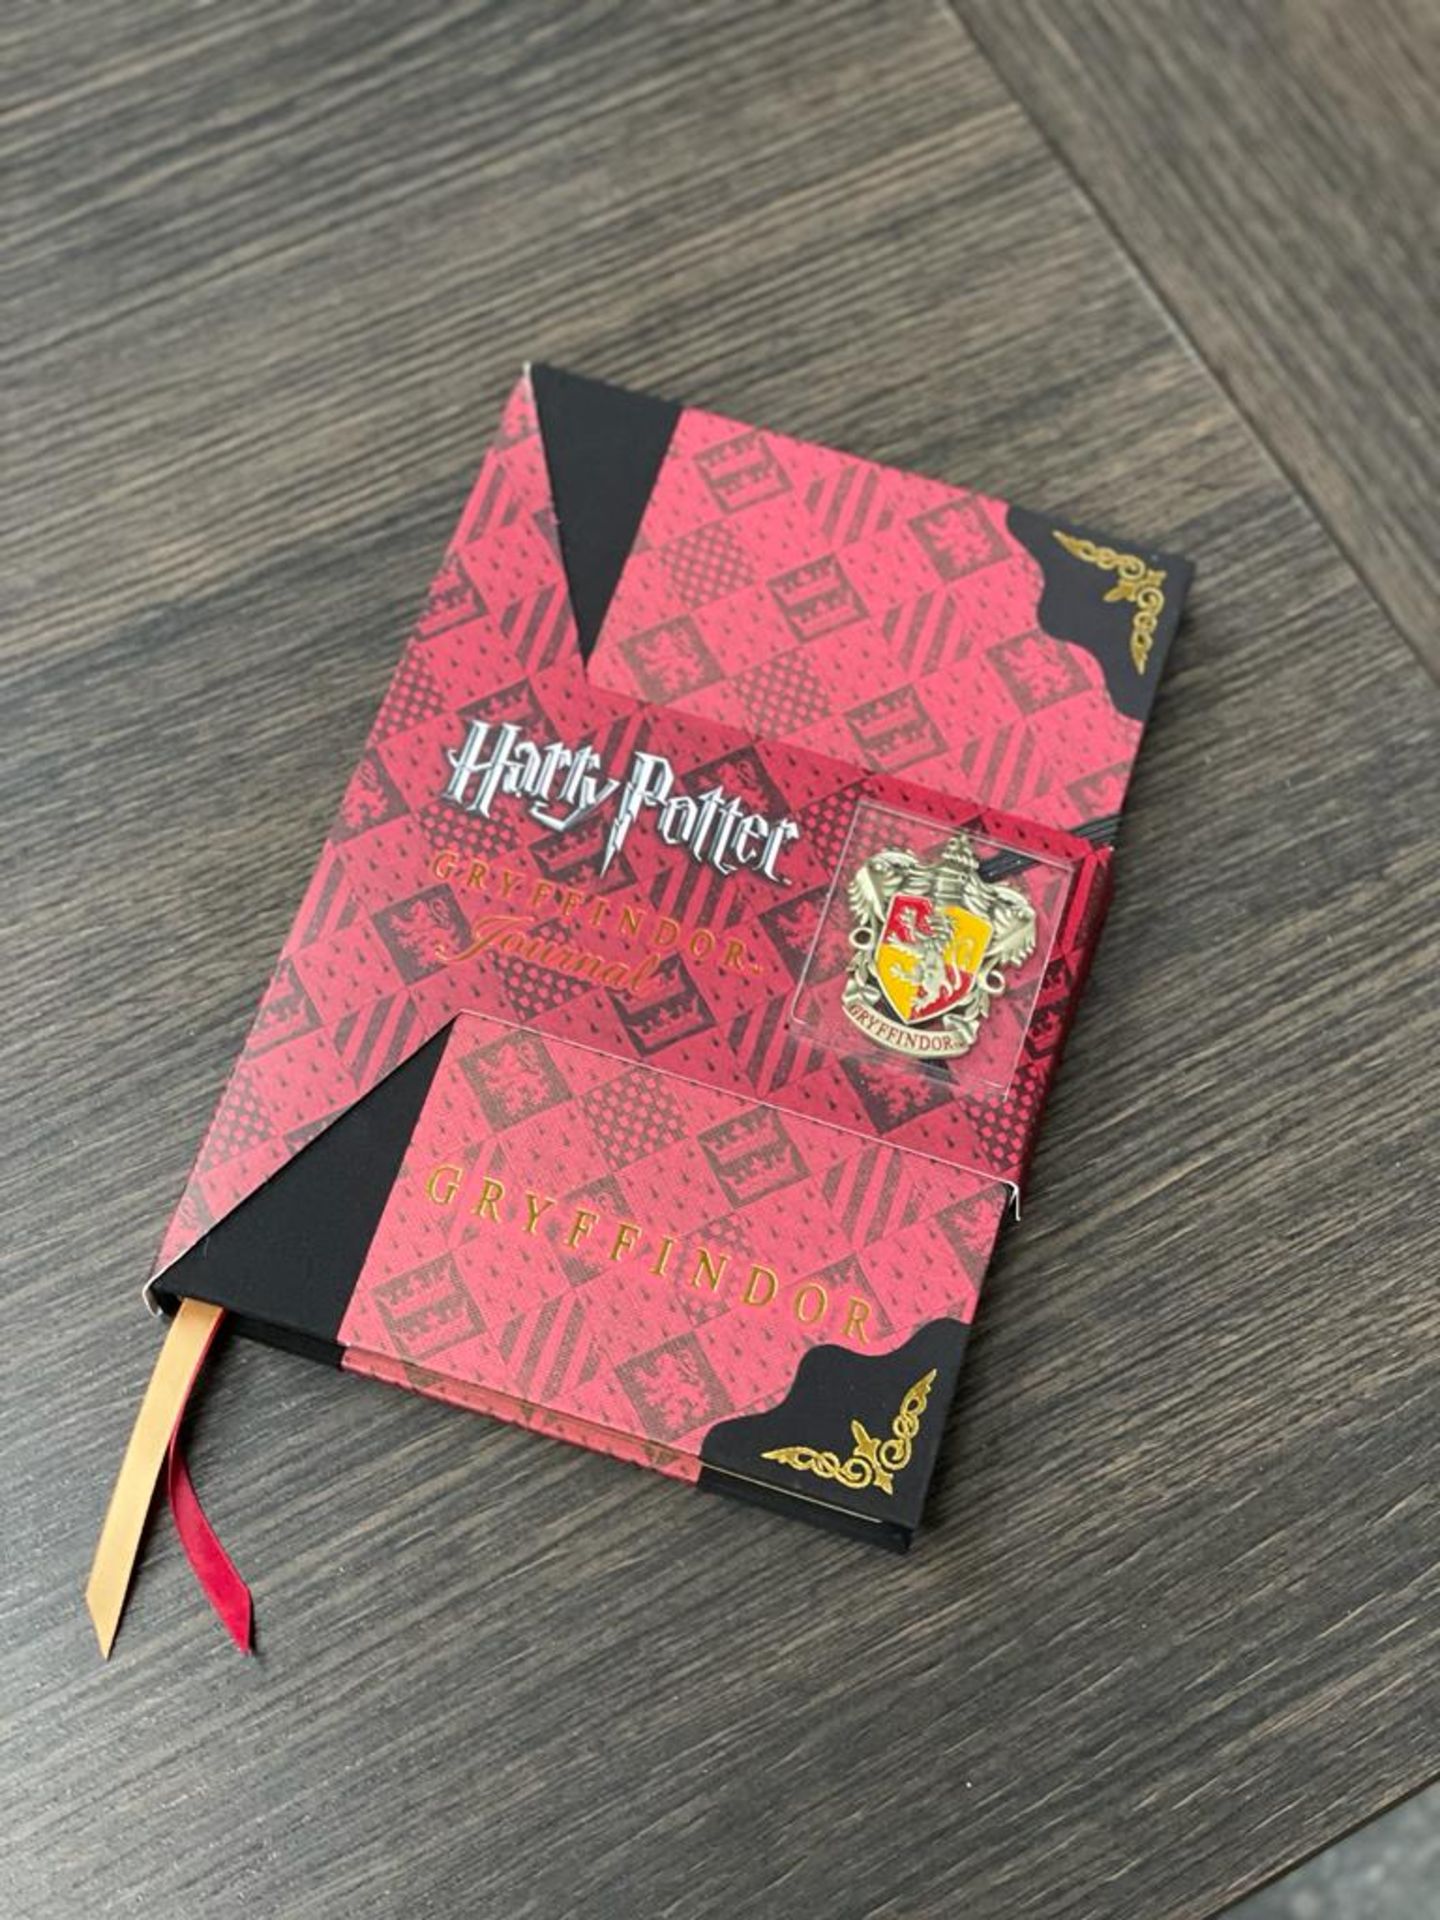 1 x Harry Potter Twin Toy Collection - The Noble Collection Harry Potter Hedwig Collector's - Image 4 of 5